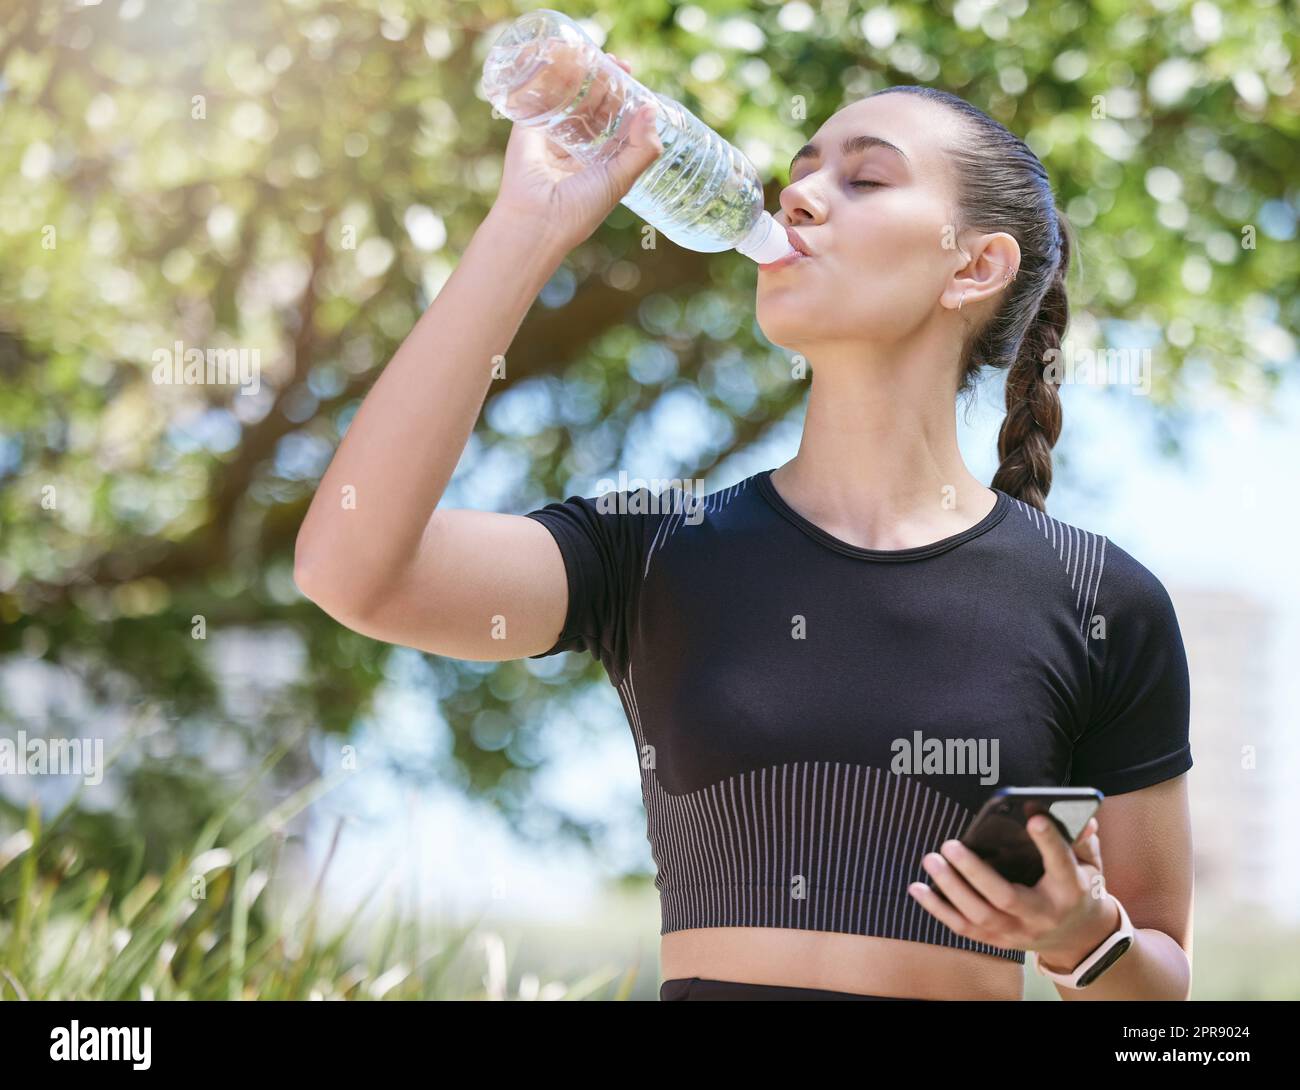 https://c8.alamy.com/comp/2PR9024/young-female-athlete-taking-a-break-and-drinking-water-from-a-bottle-and-holding-smartphone-while-out-for-a-run-and-exercising-outdoors-during-the-day-2PR9024.jpg